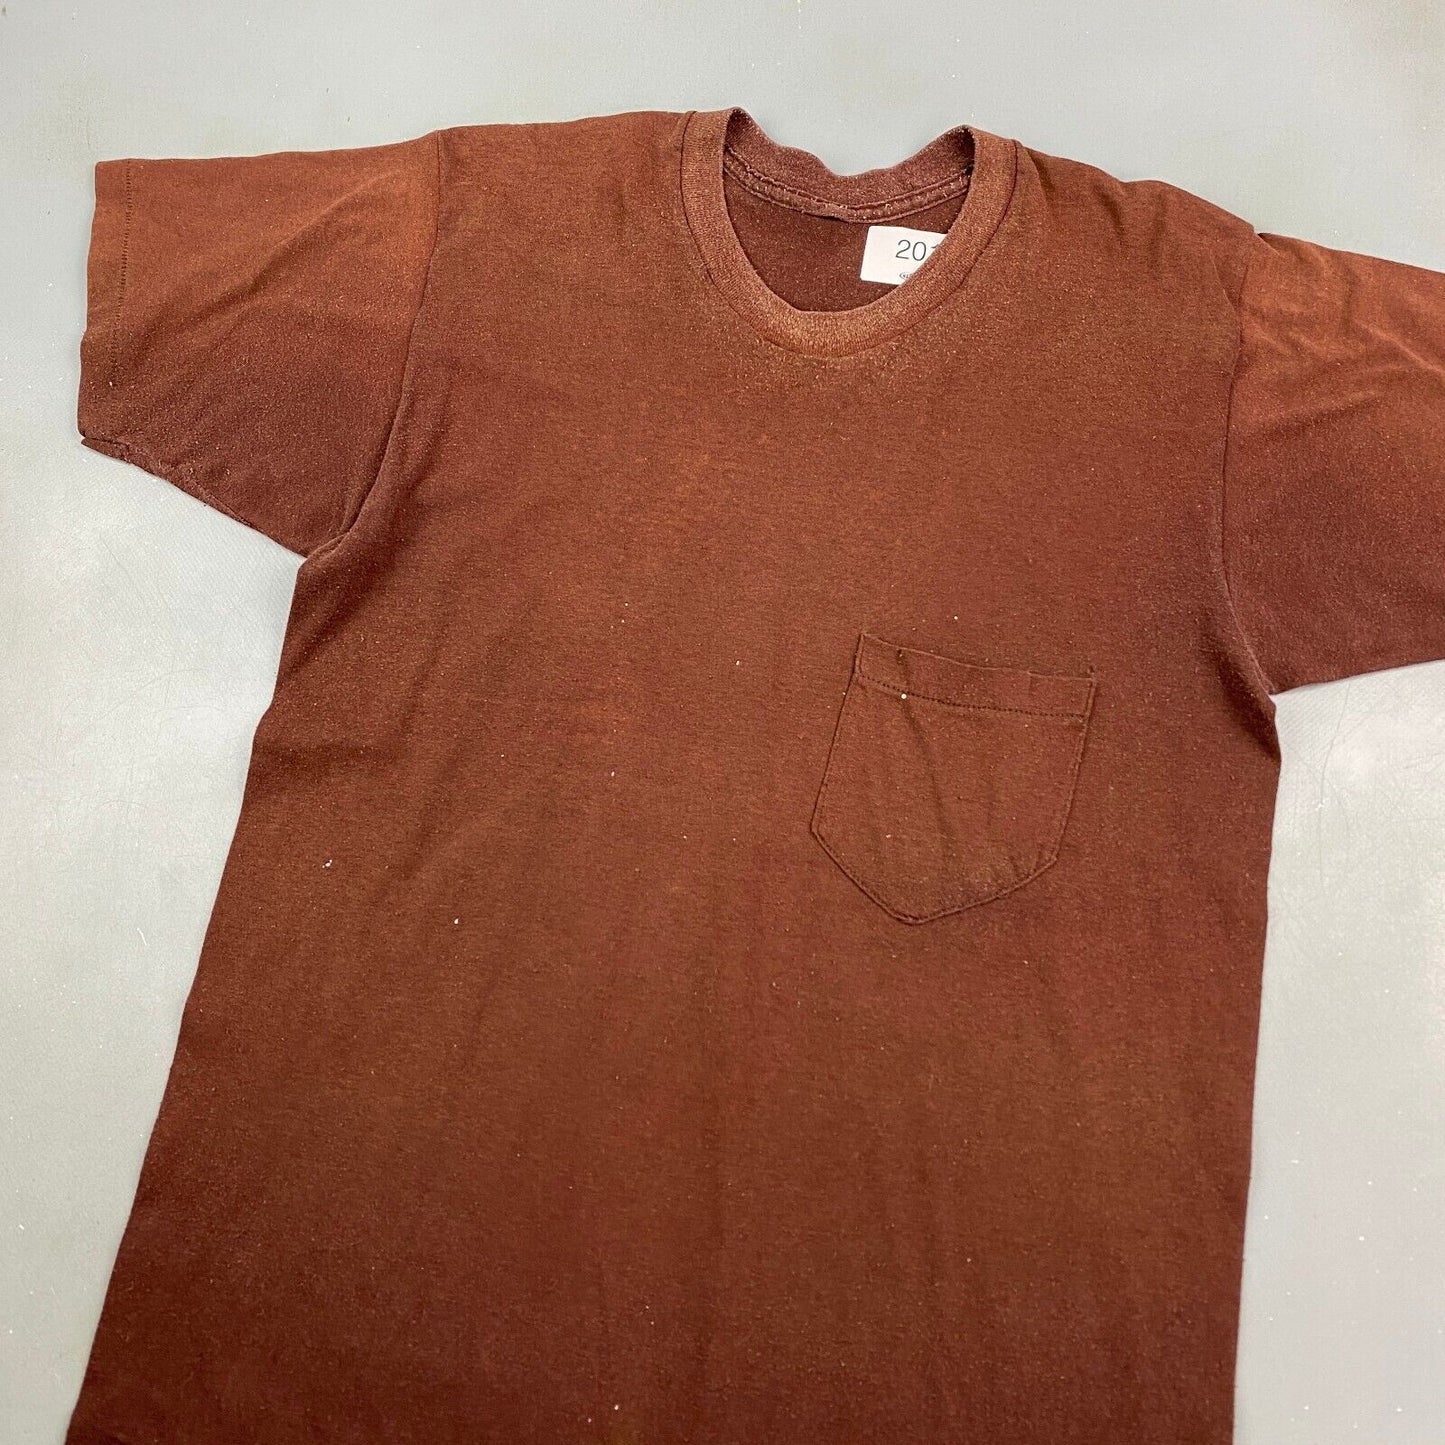 VINTAGE 90s Faded Brown Blank T-Shirt sz Small Men